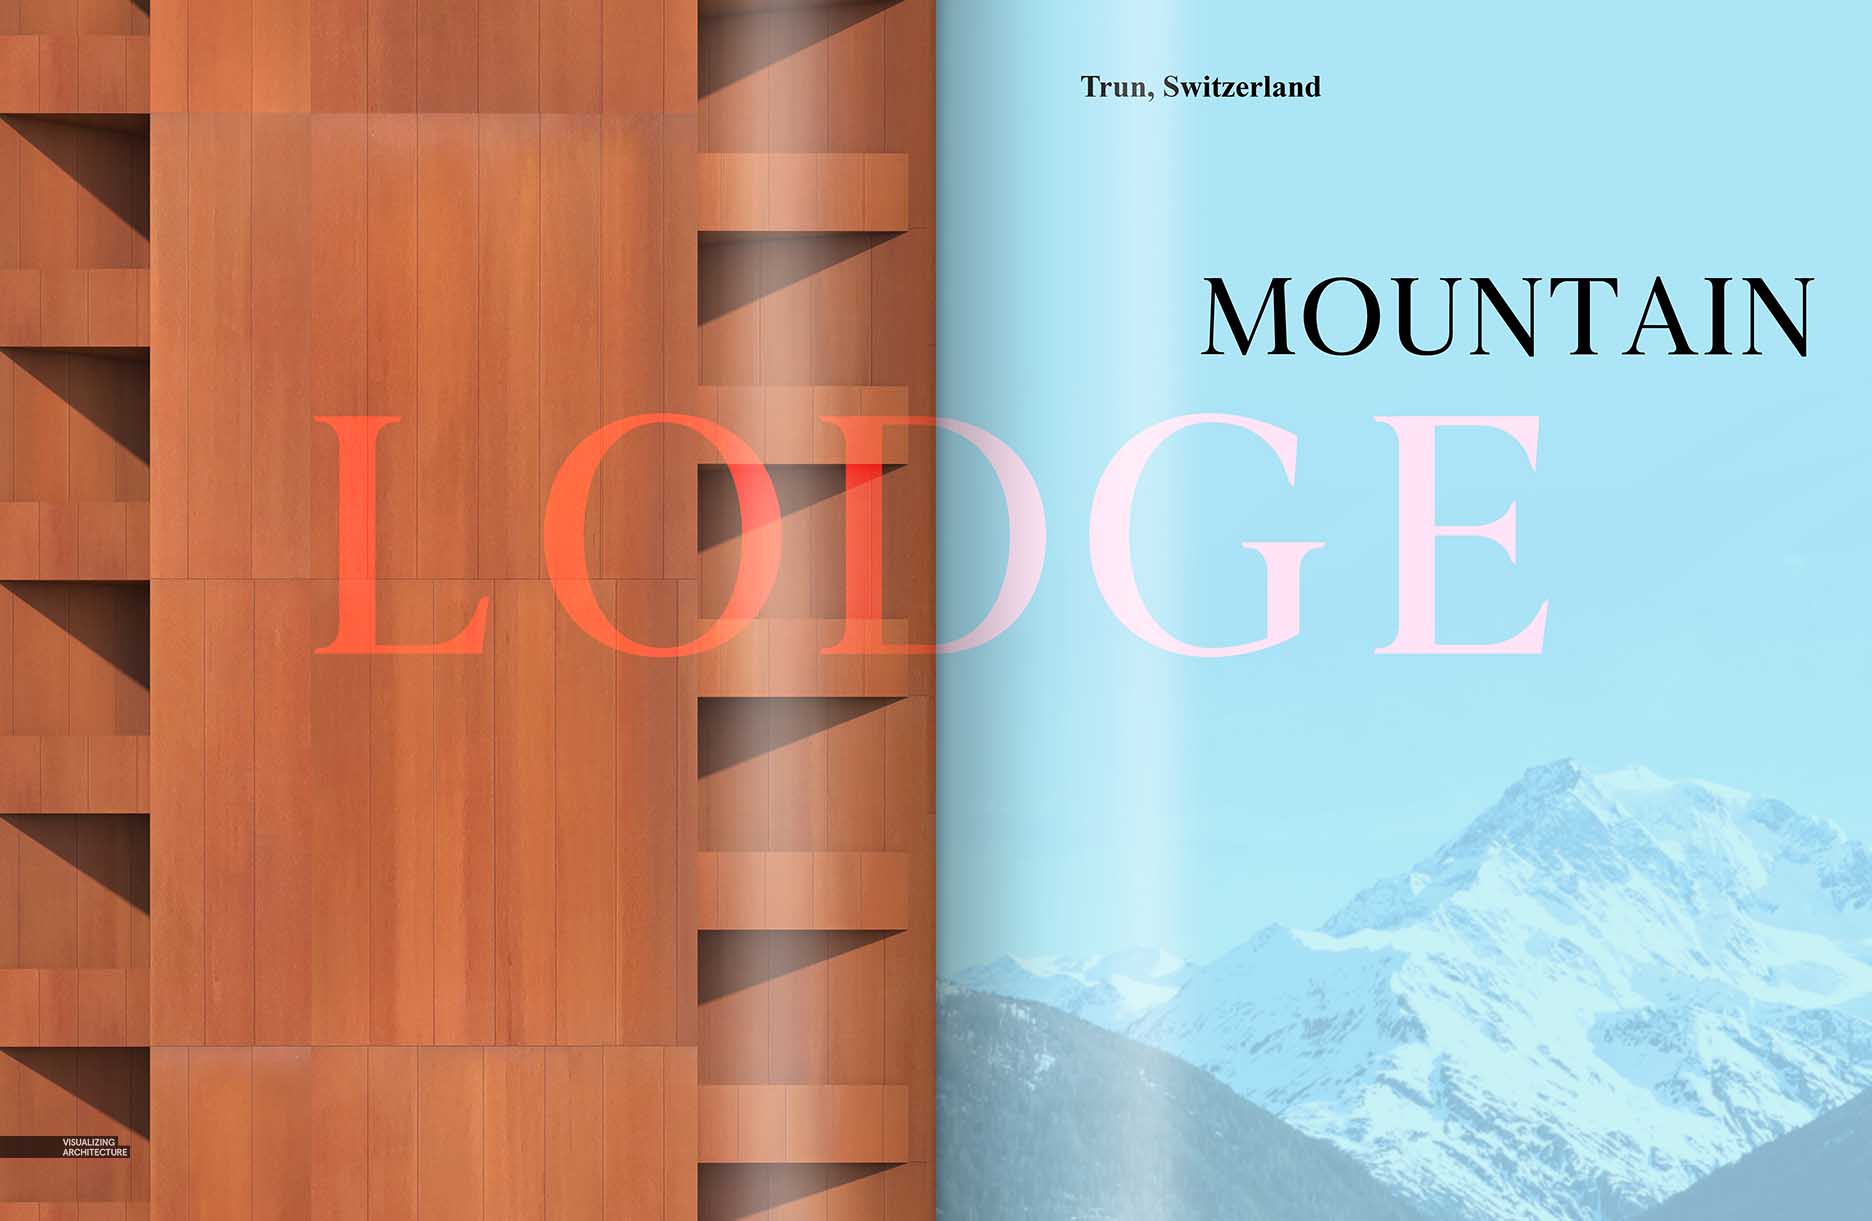 Mountain Lodge Spreads